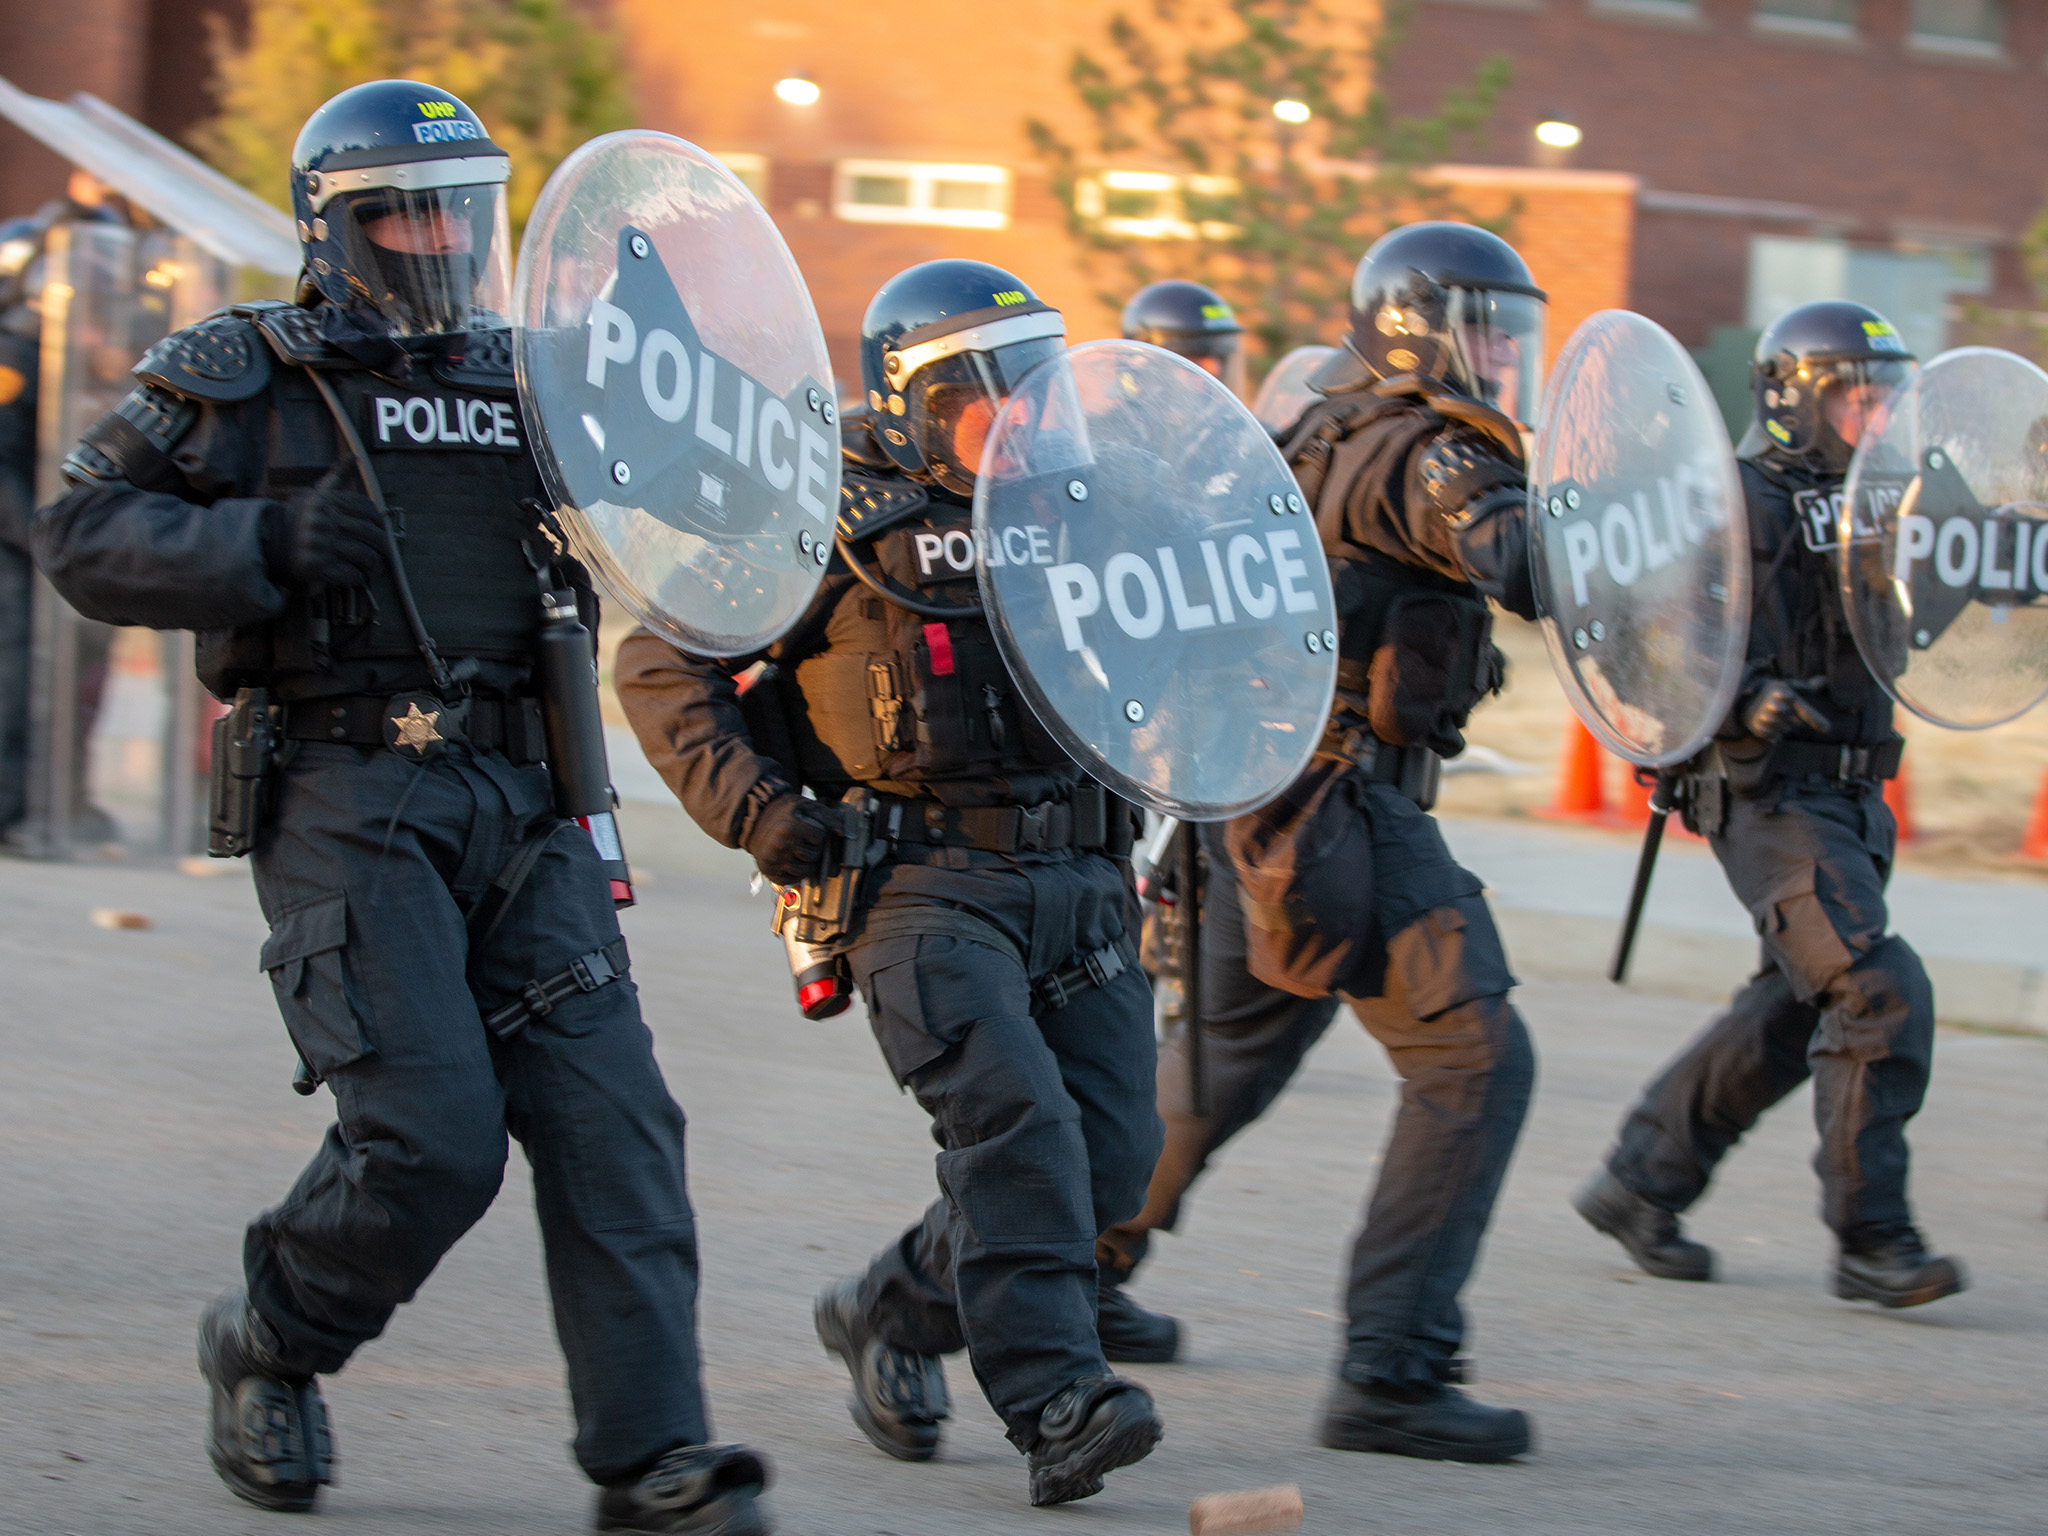 Four UHP Troopers are dressed in riot gear and holding shields that read "Police" and are participating in a PPU training exercise.